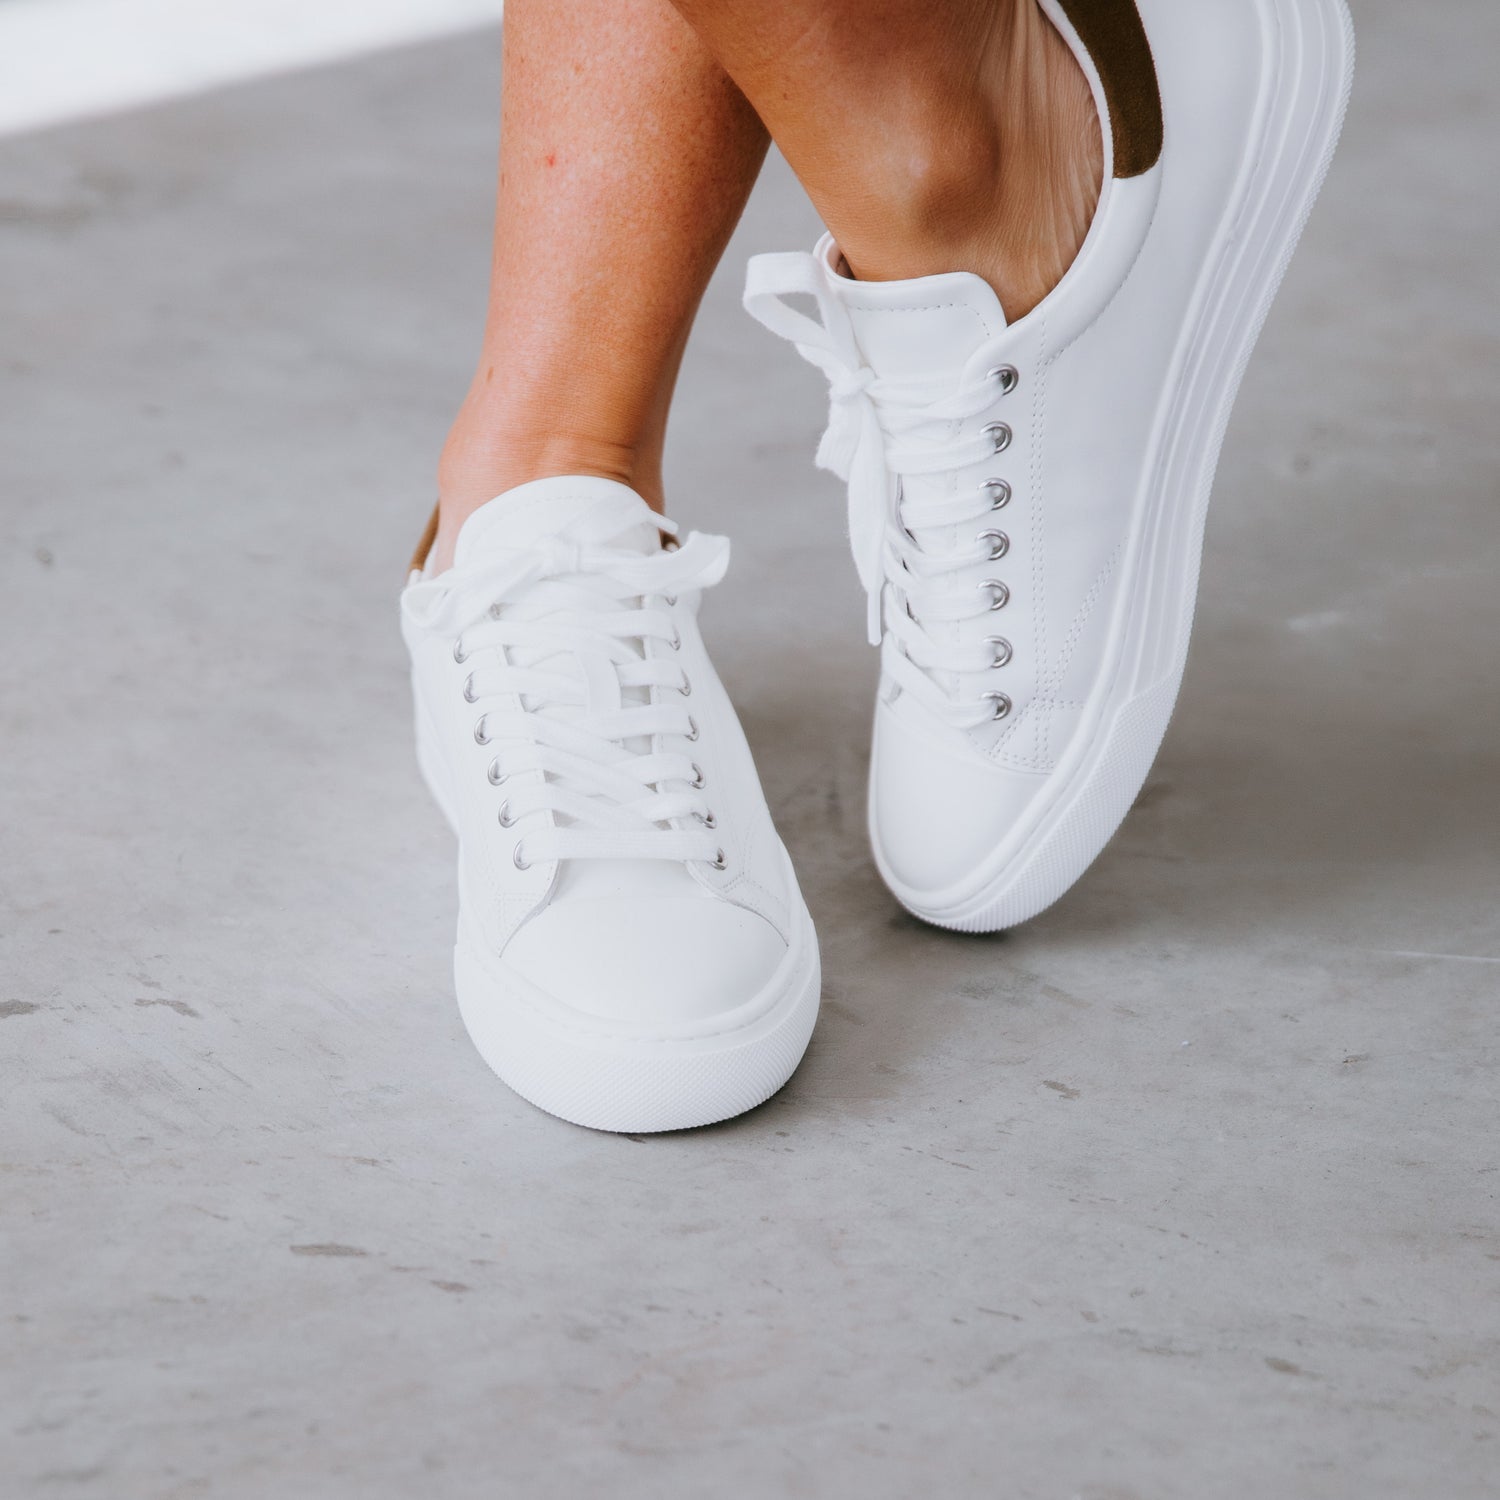 Steve Madden Captivate Sneakers – Lauriebelles